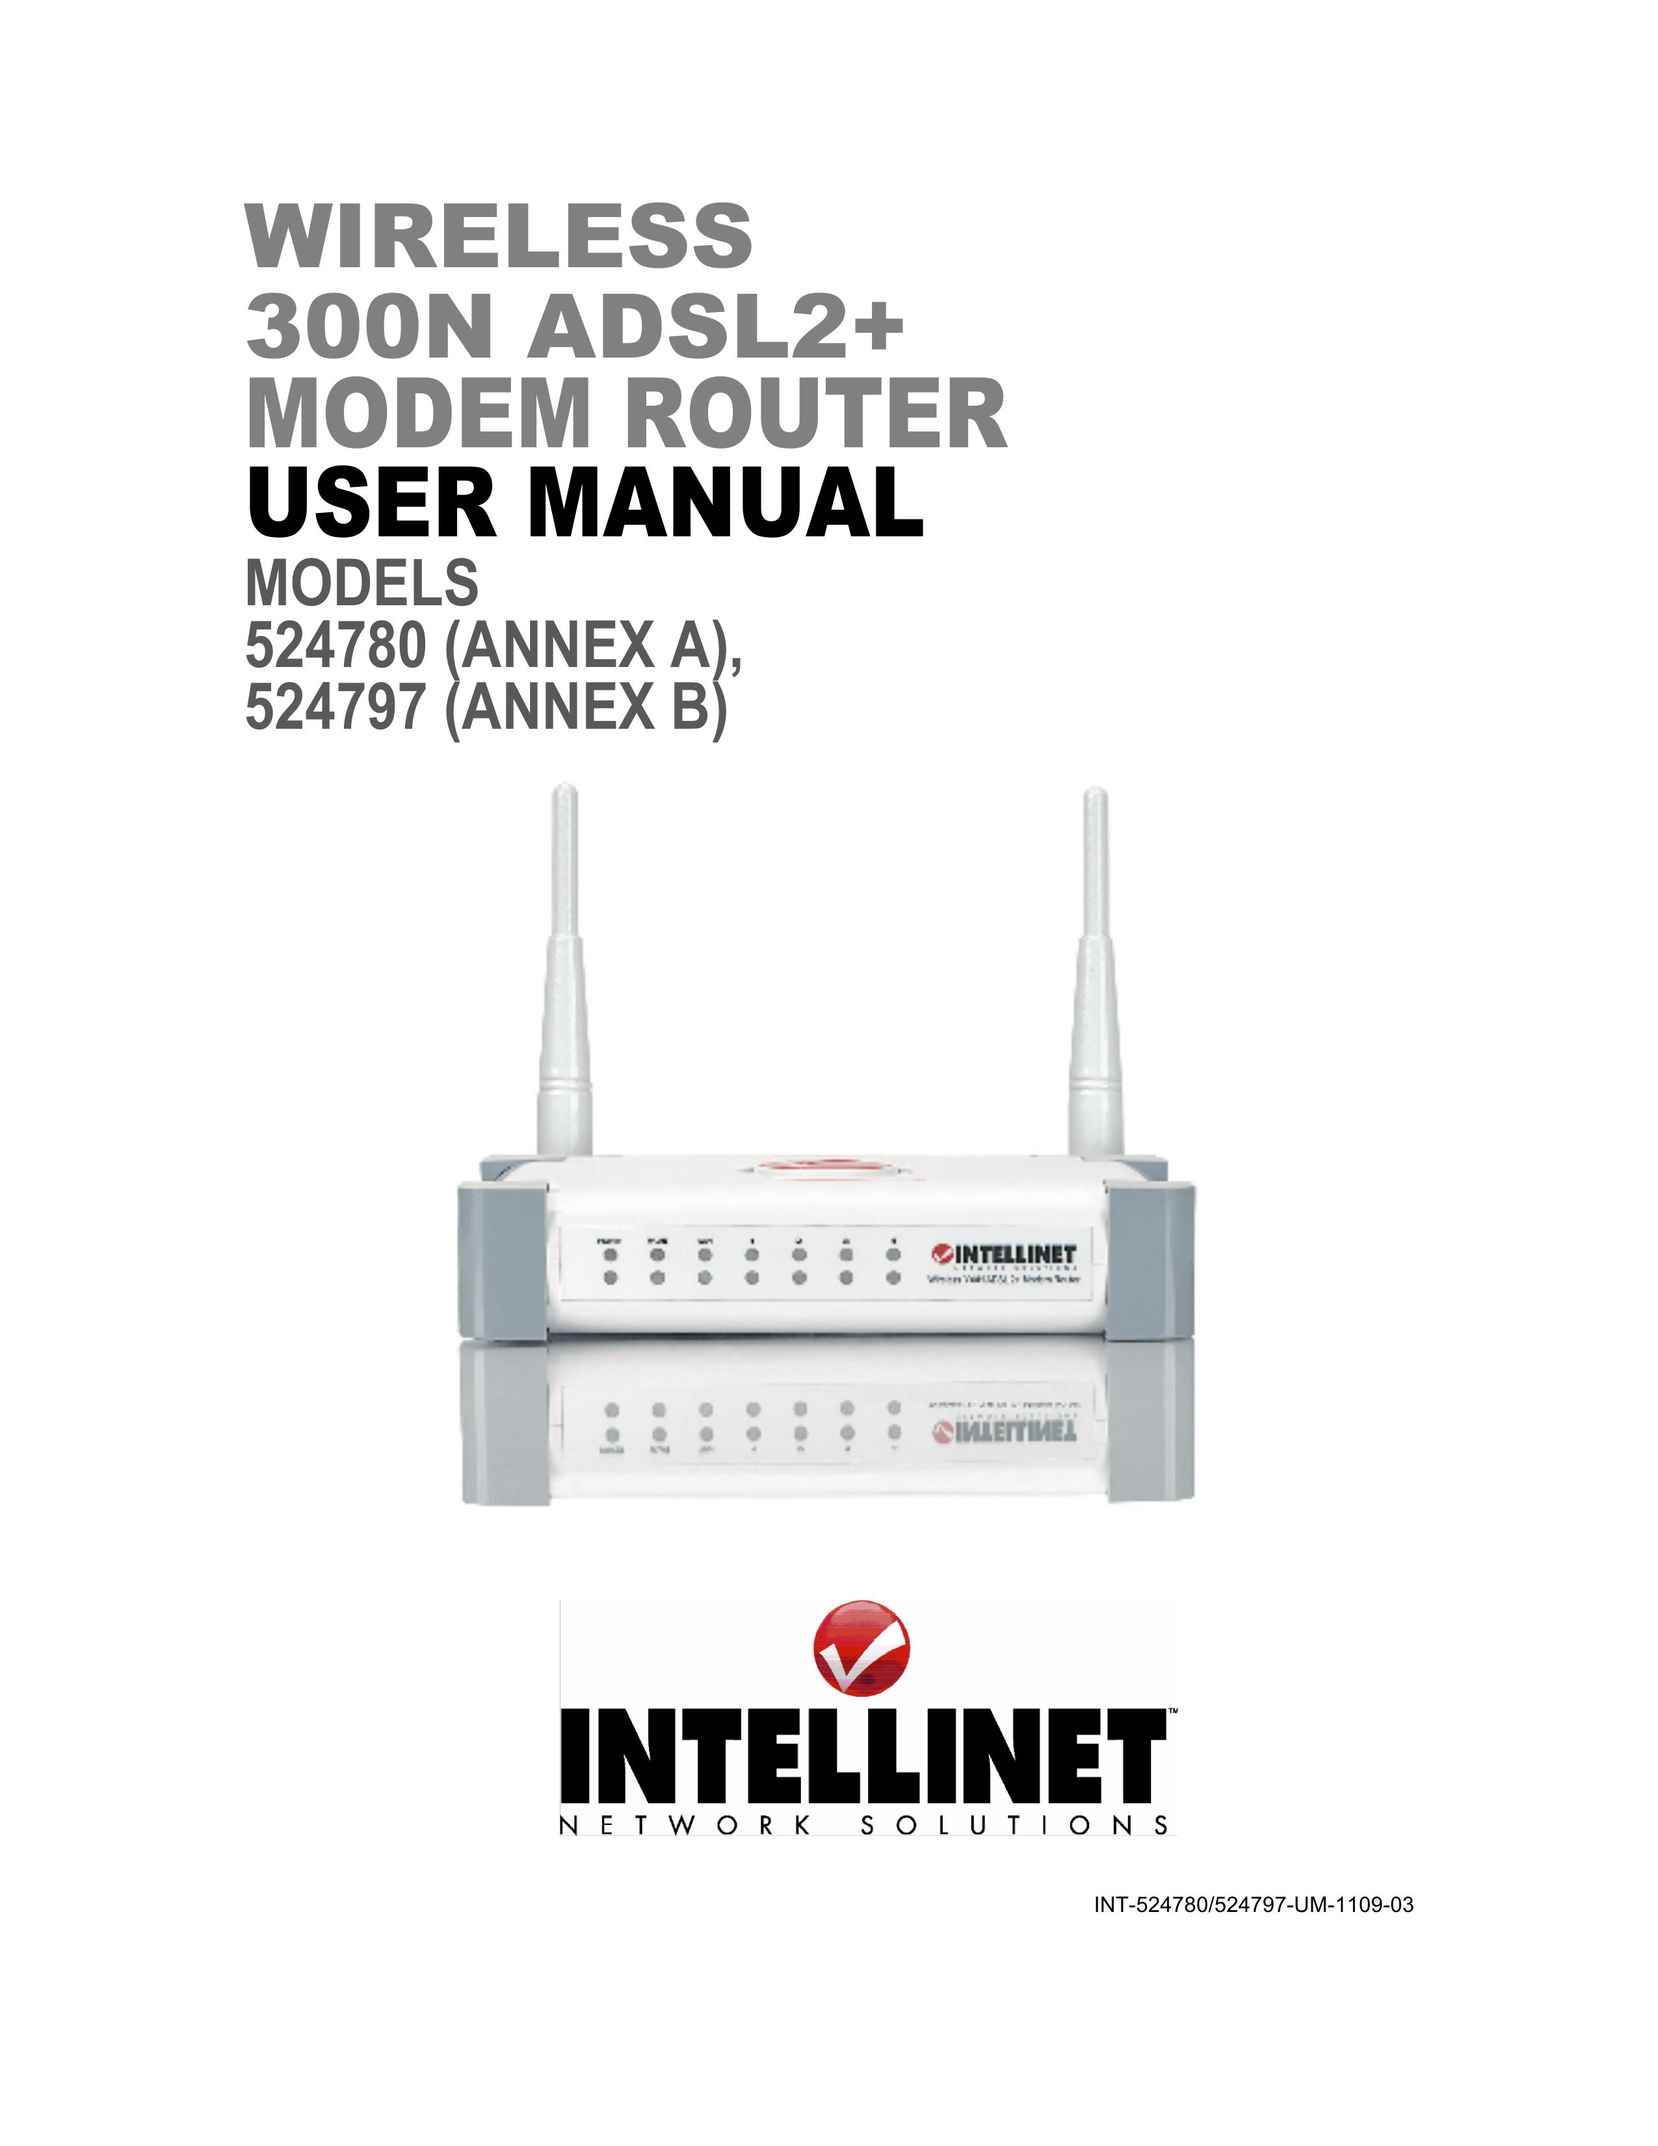 Intellinet Network Solutions 524780 Network Router User Manual